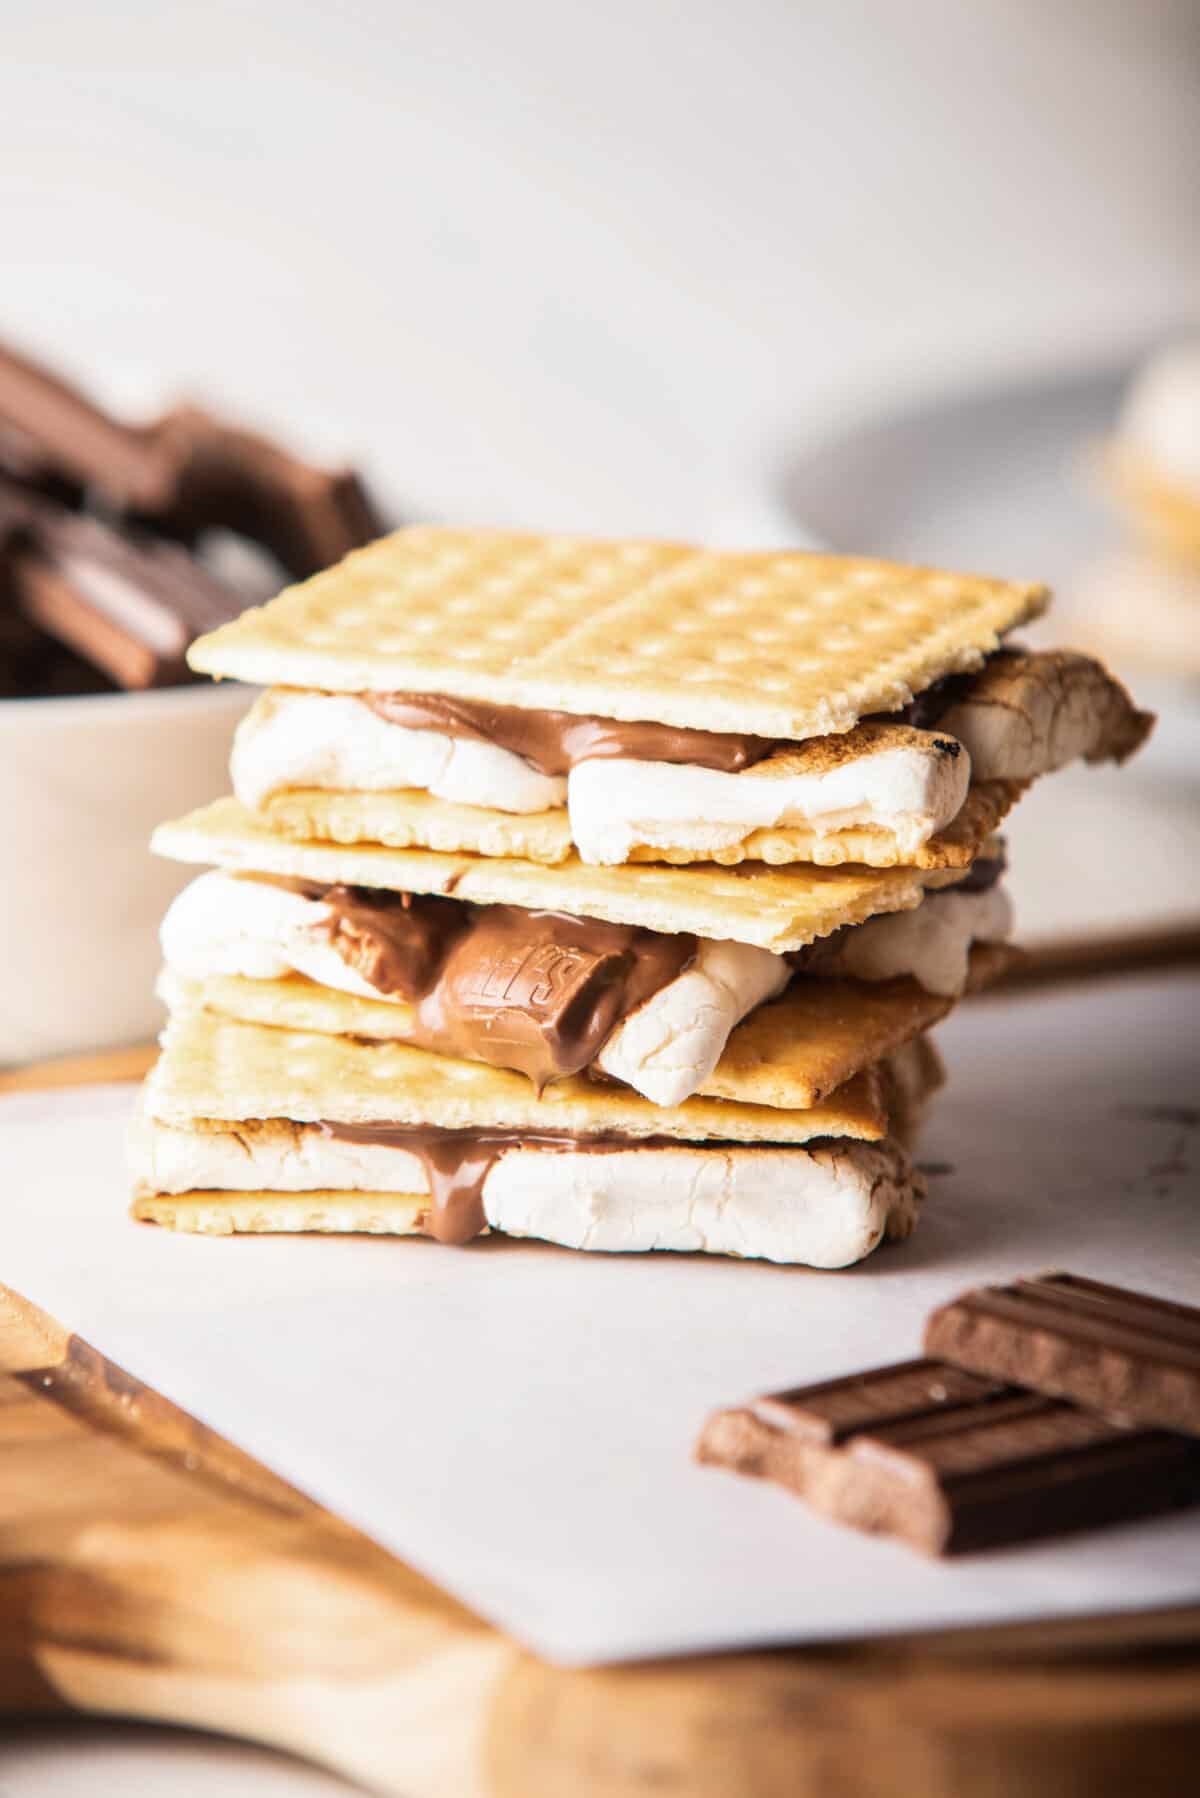 A straight view of cooked air fryer s'mores above a wooden board next to pieces of chocolate.